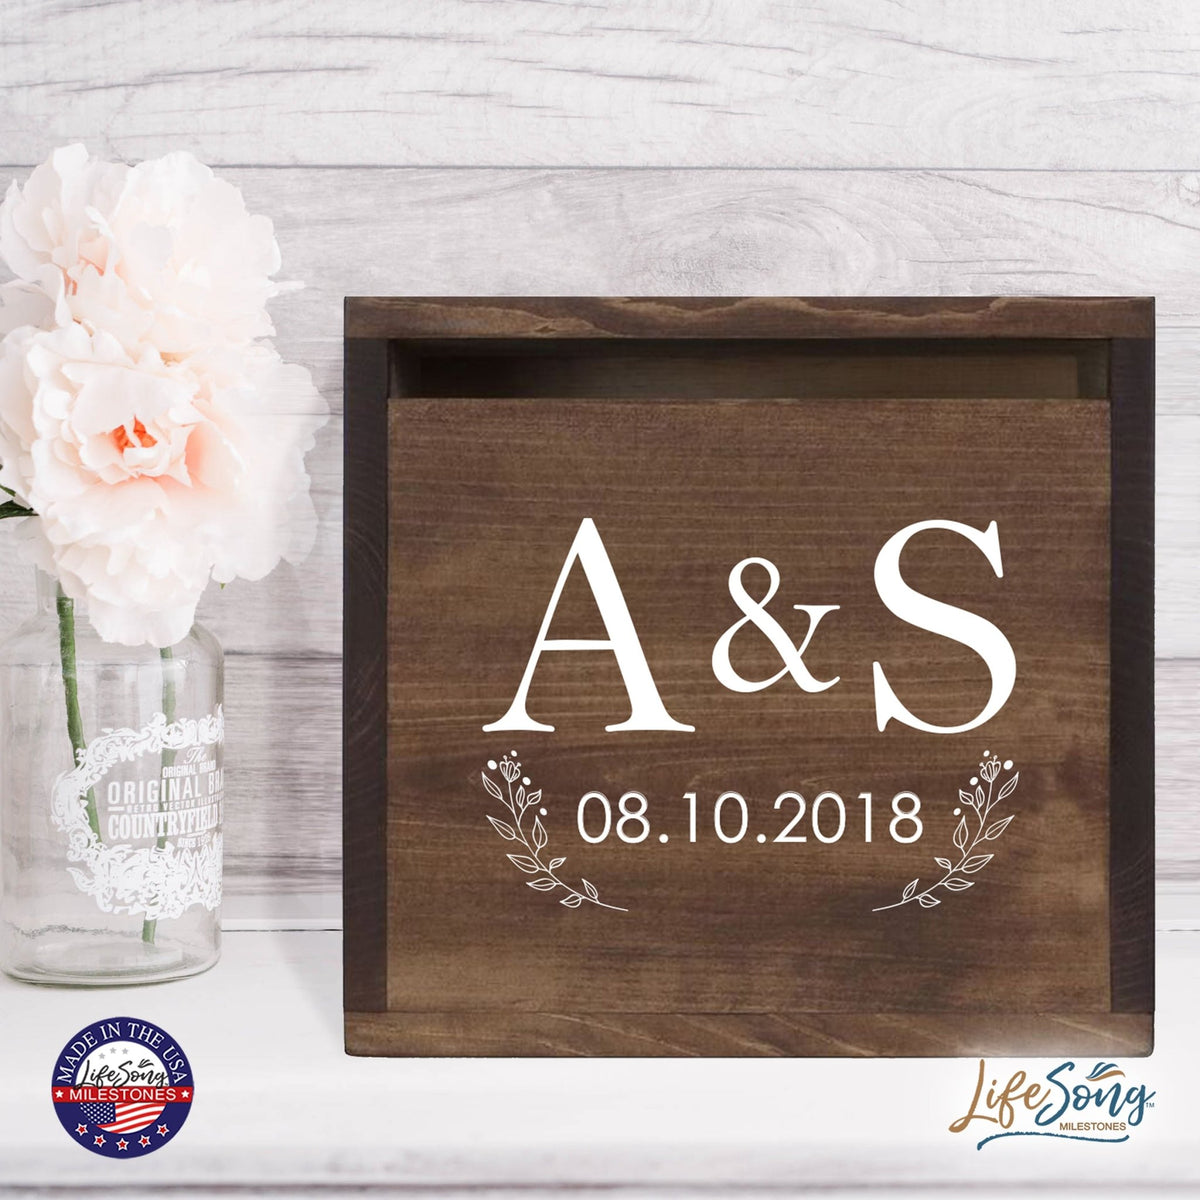 Personalized Wooden Card Box for Wedding Ceremonies, Venues, Receptions, Bridal Showers, and Engagement Parties 13.5x12 - A&amp;S (Flowers) - LifeSong Milestones